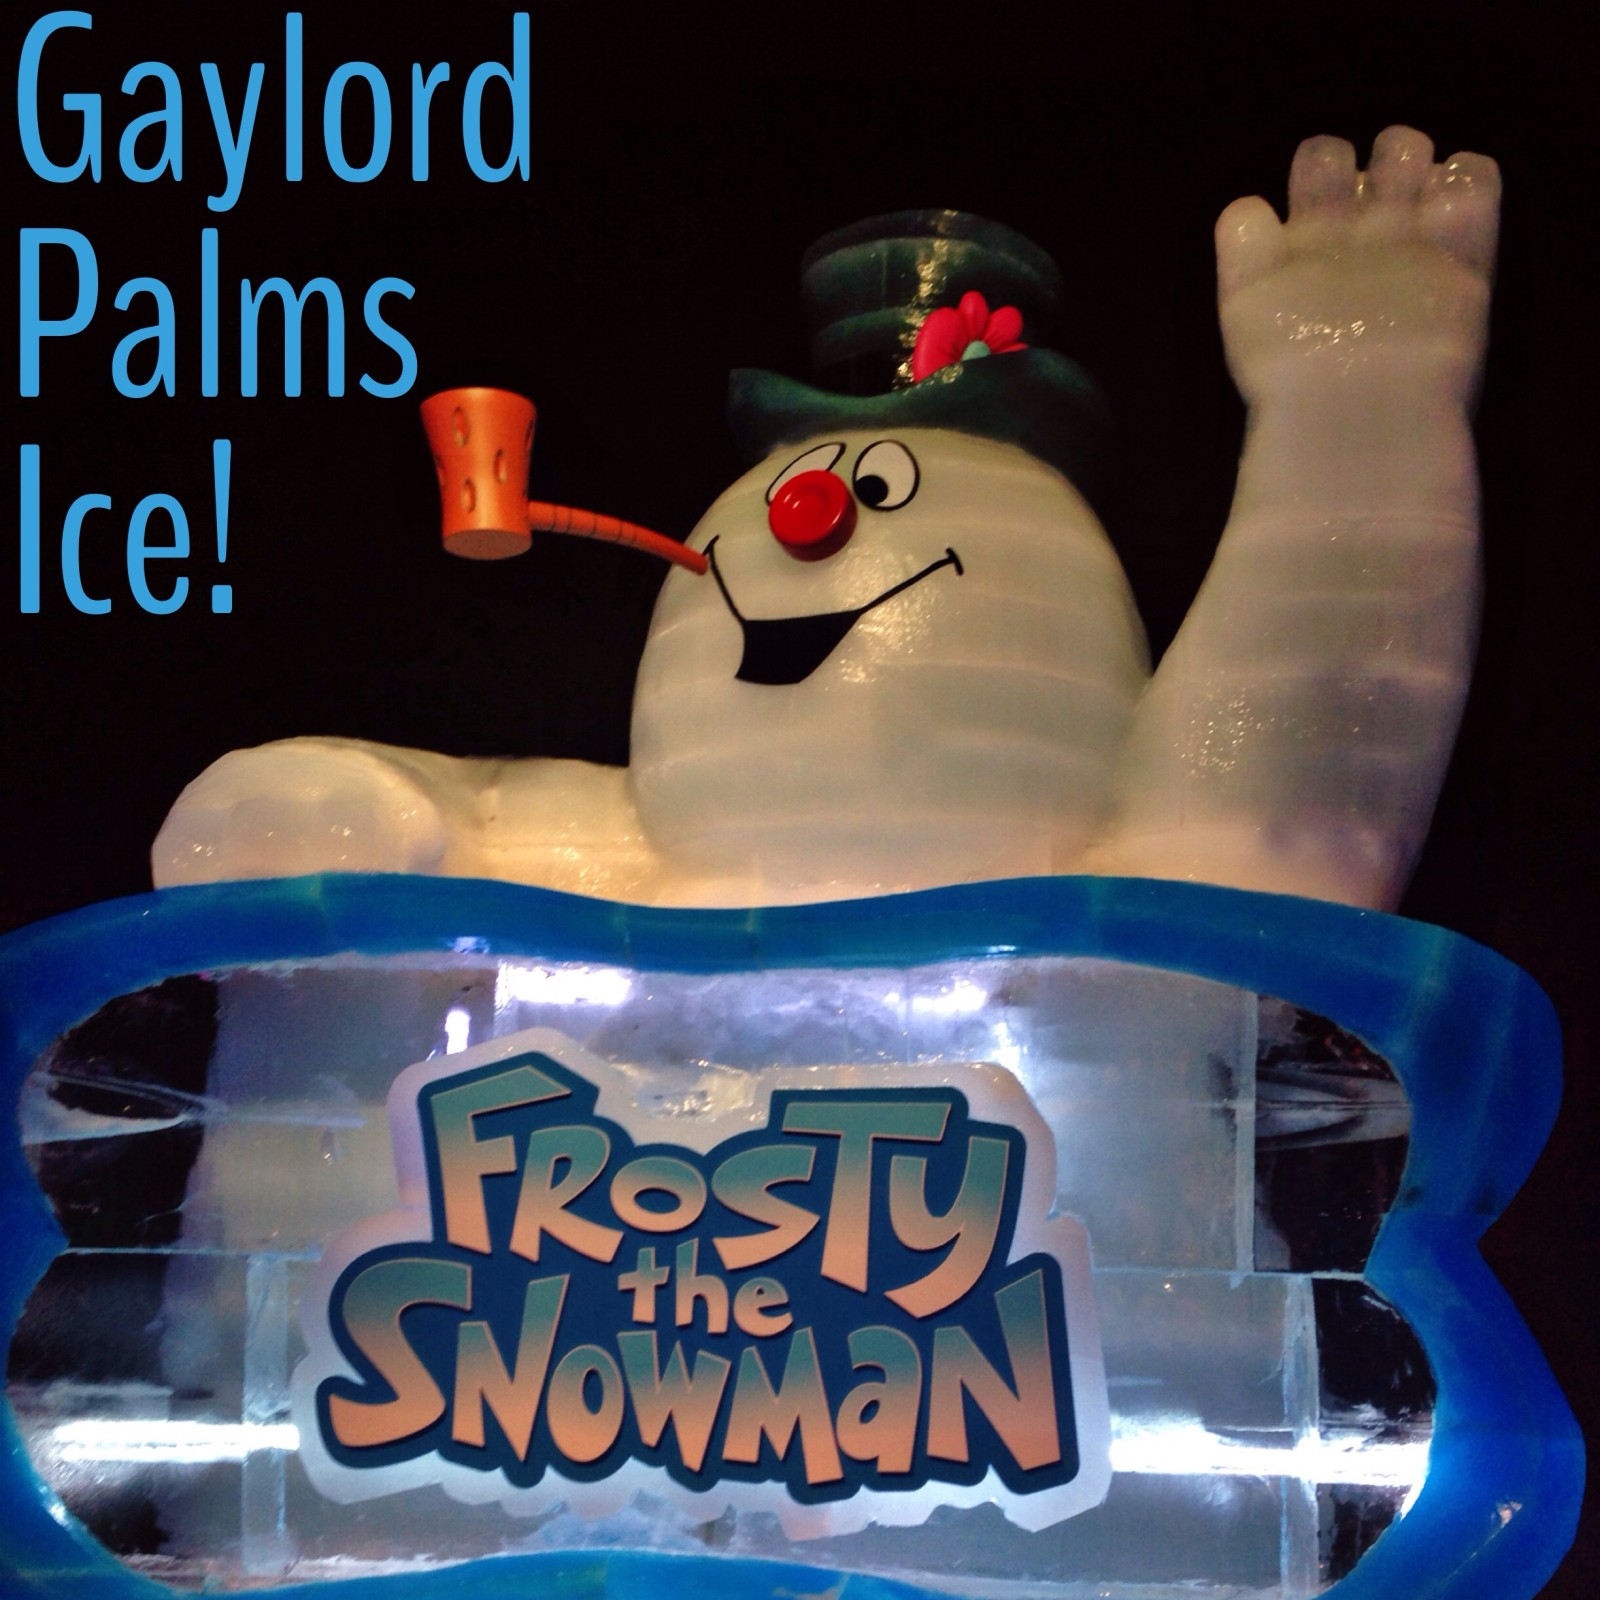 Gaylord Palms Ice!